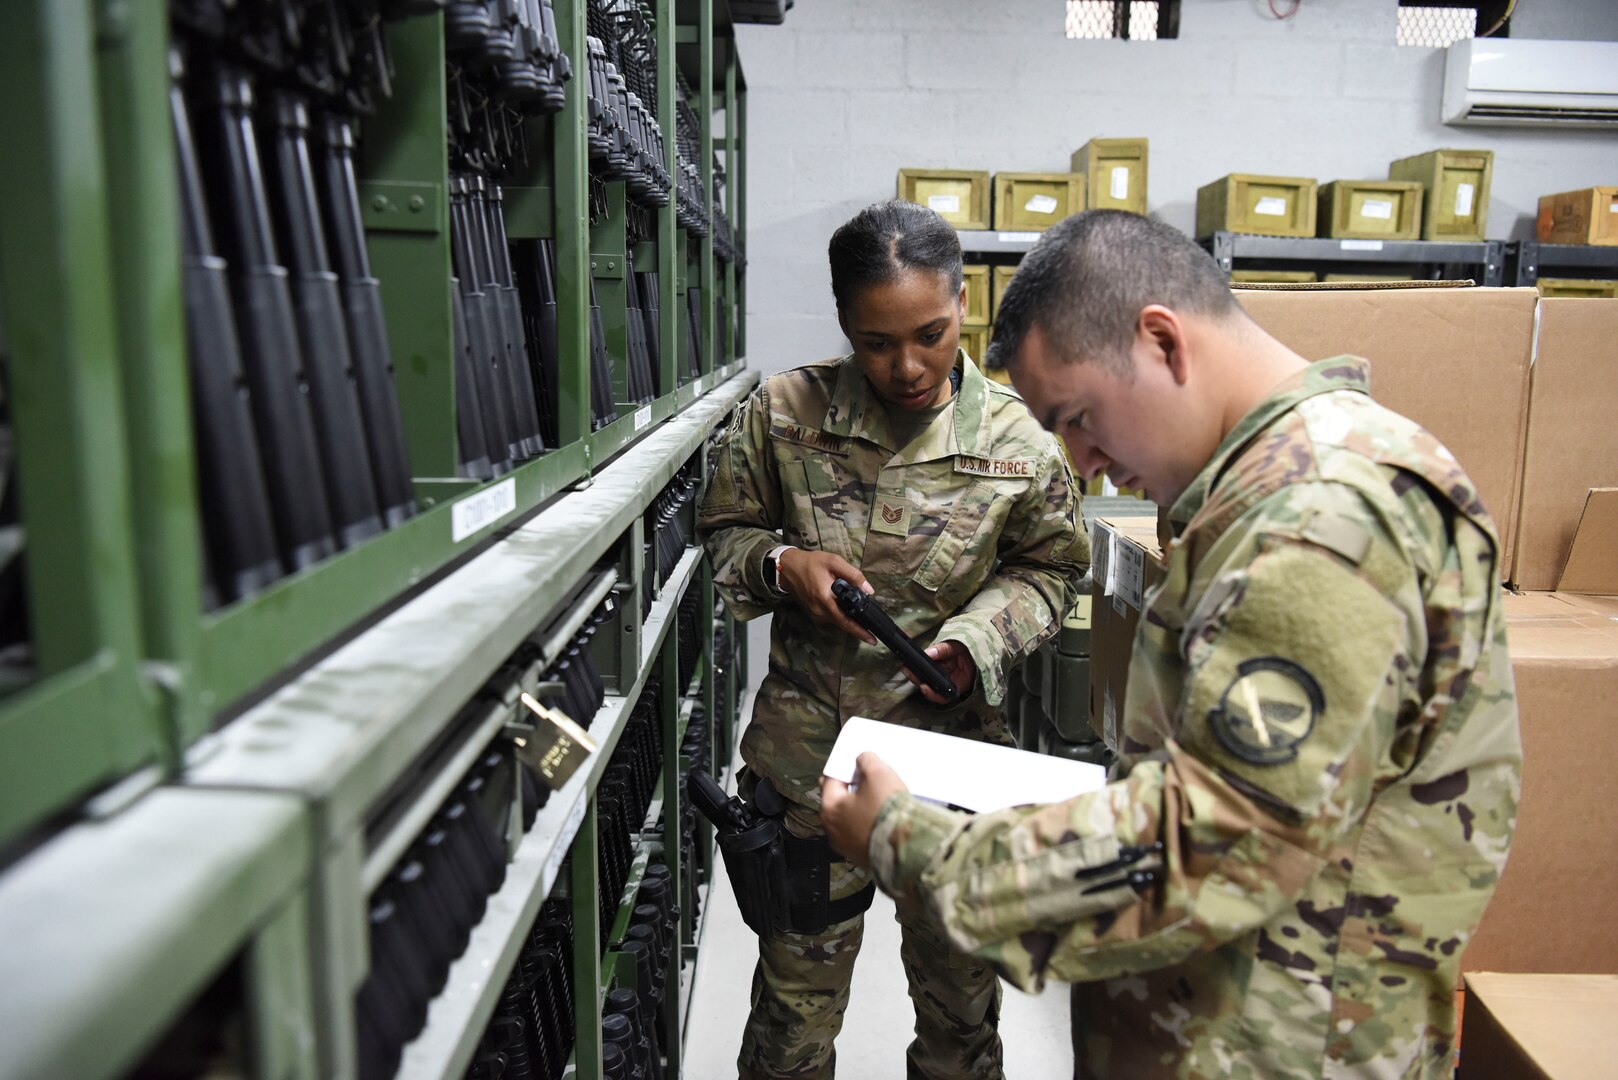 Tech. Sgt. Caresia Baldwin, 380th Expeditionary Logistics Readiness Squadron Individual Protective Equipment Section Chief, and Staff Sgt. Juan Nunez, 380th ELRS IPE supervisor, perform a weapons inventory inside the equipment accountability office at Al Dhafra Air Base, United Arab Emirates, Feb. 11, 2019.